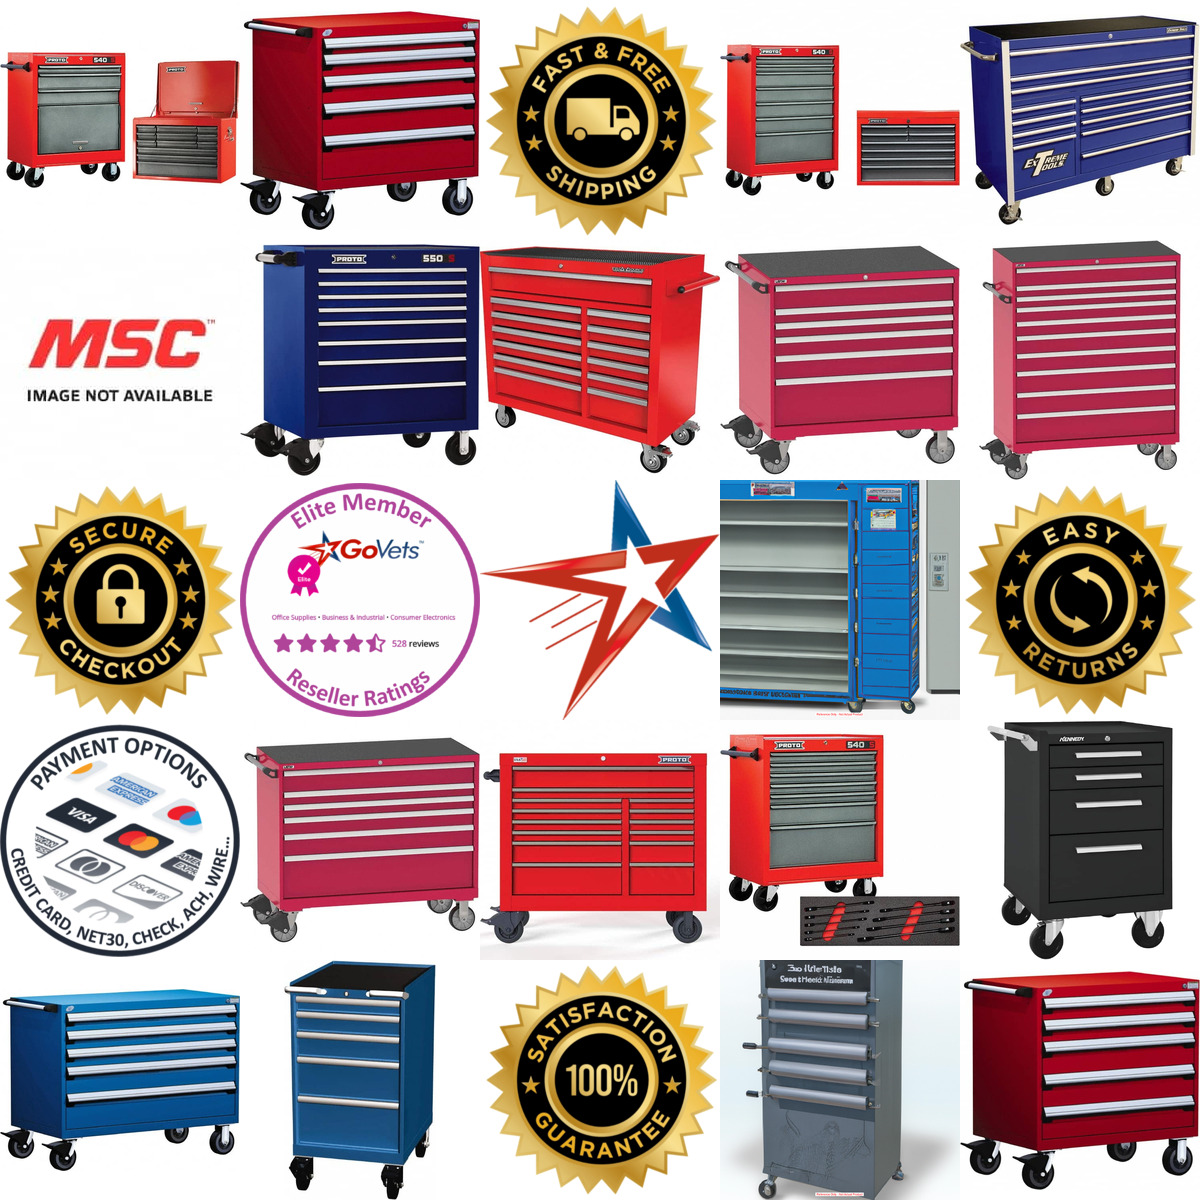 A selection of Tool Roller Cabinets products on GoVets